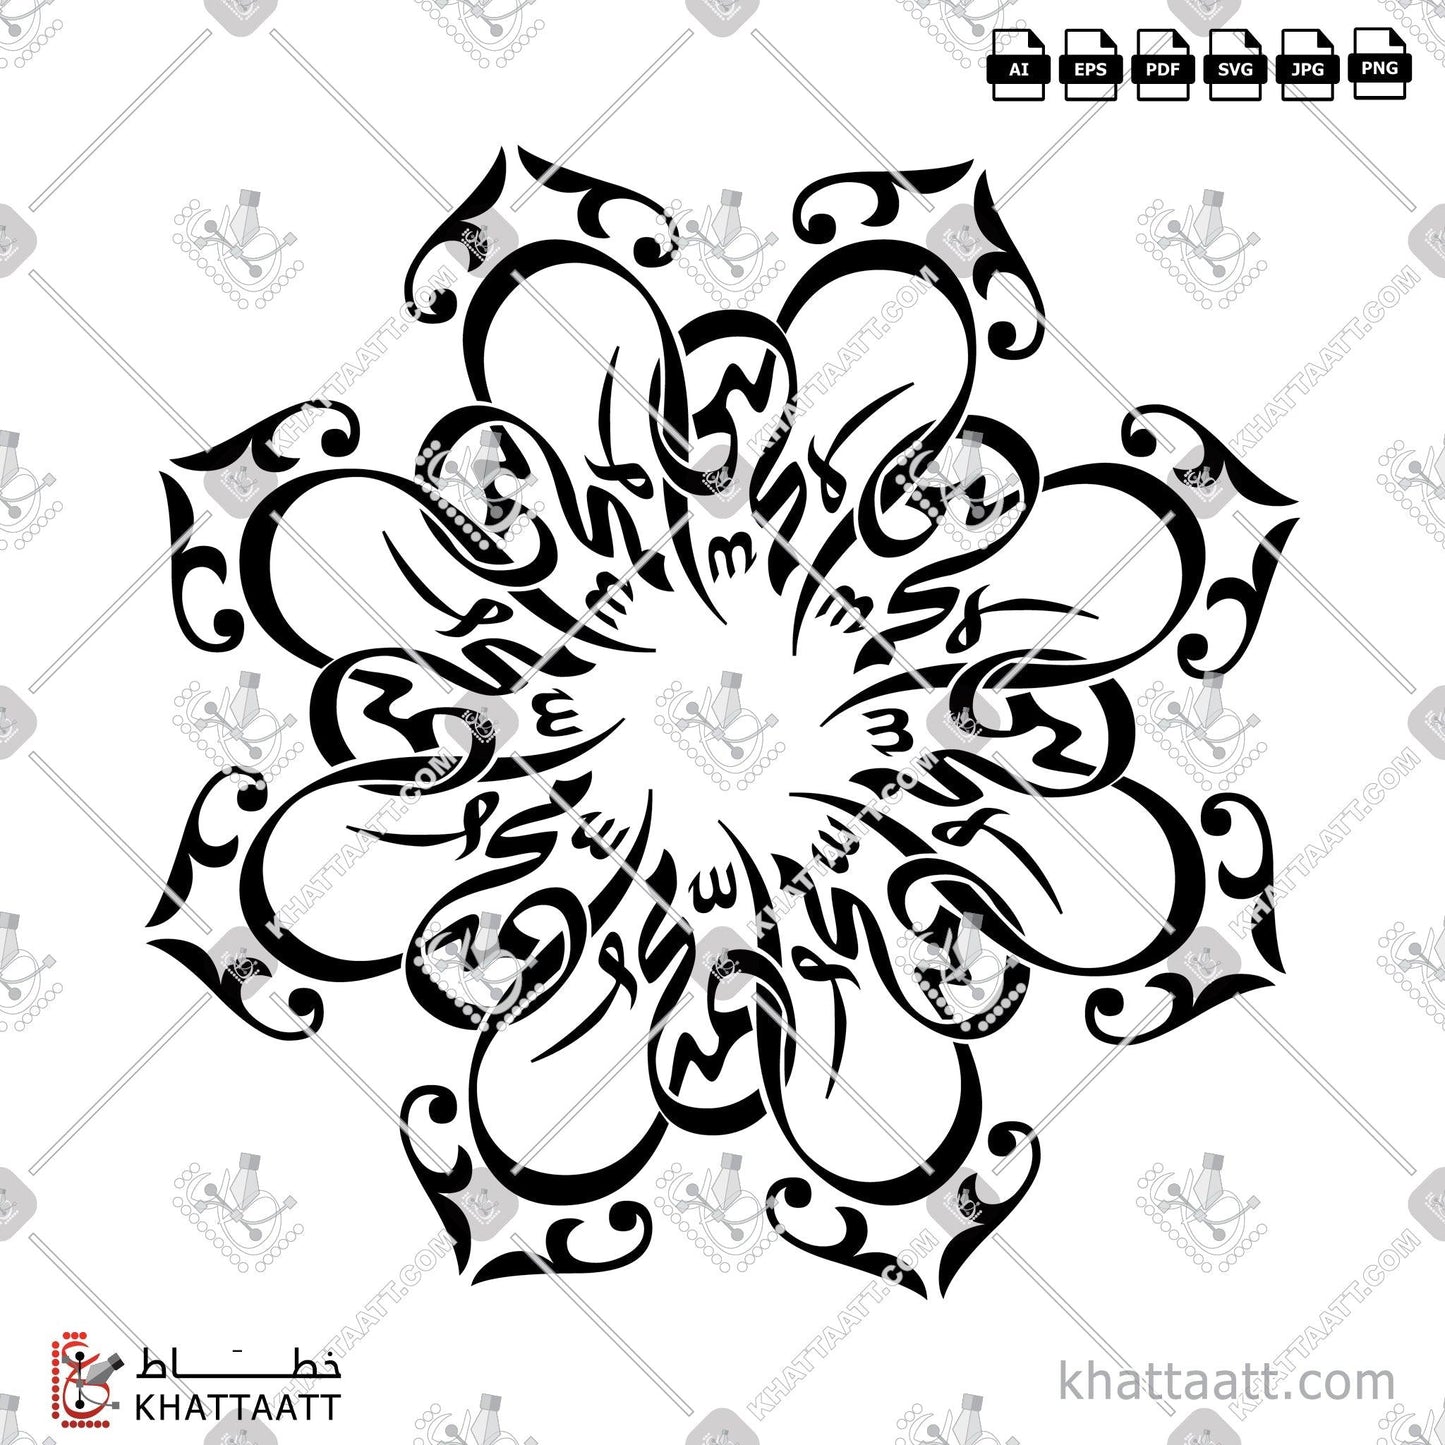 Download Arabic Calligraphy of Muhammad (ﷺ) سيدنا محمد in Diwani - الخط الديواني in vector and .png